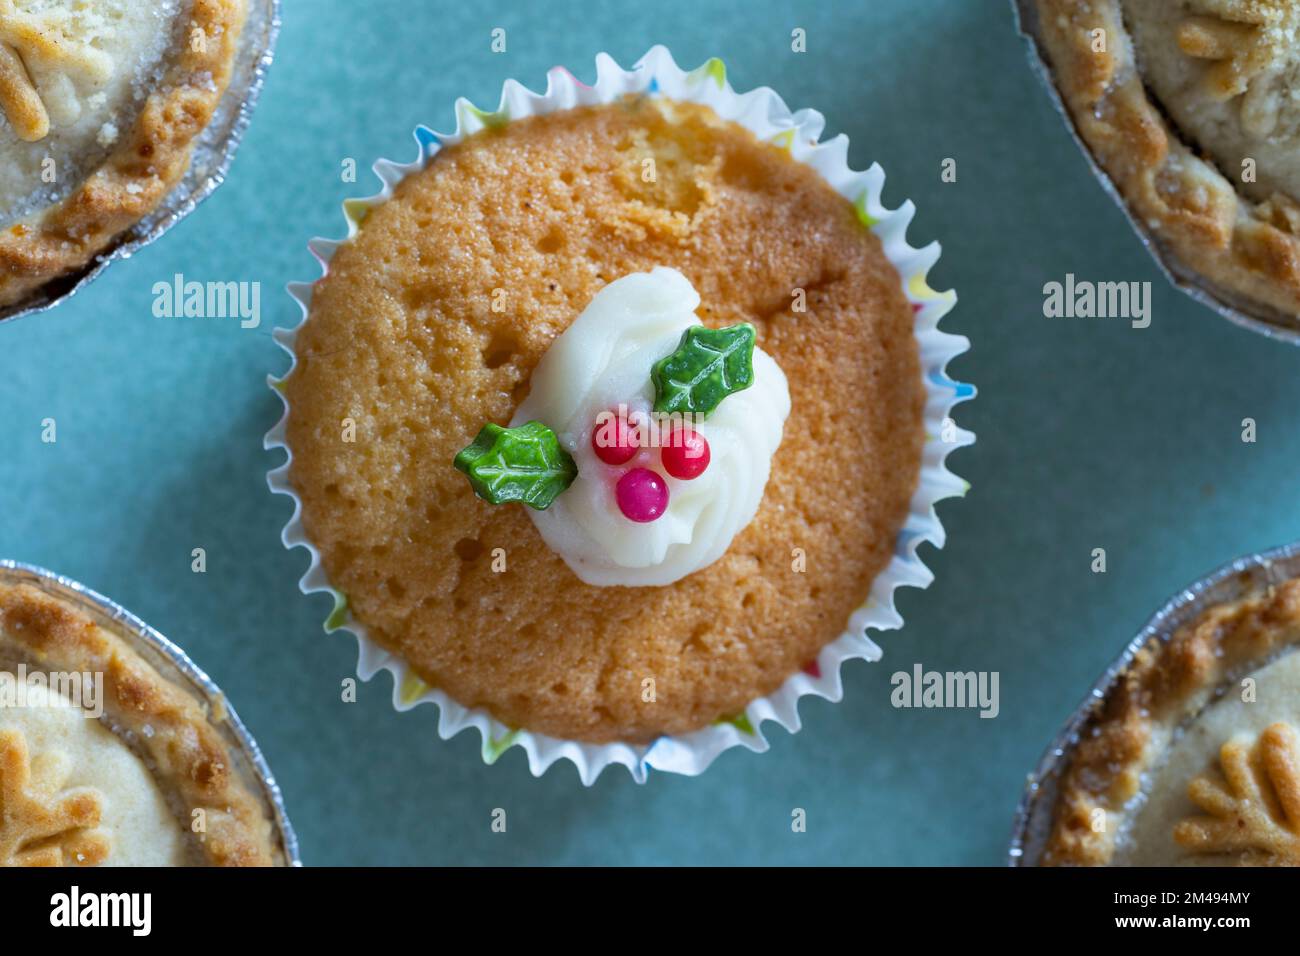 Home made cup cake with white icing and edible green holly leaves and red berries on a blue plate at Christmas time, UK Stock Photo